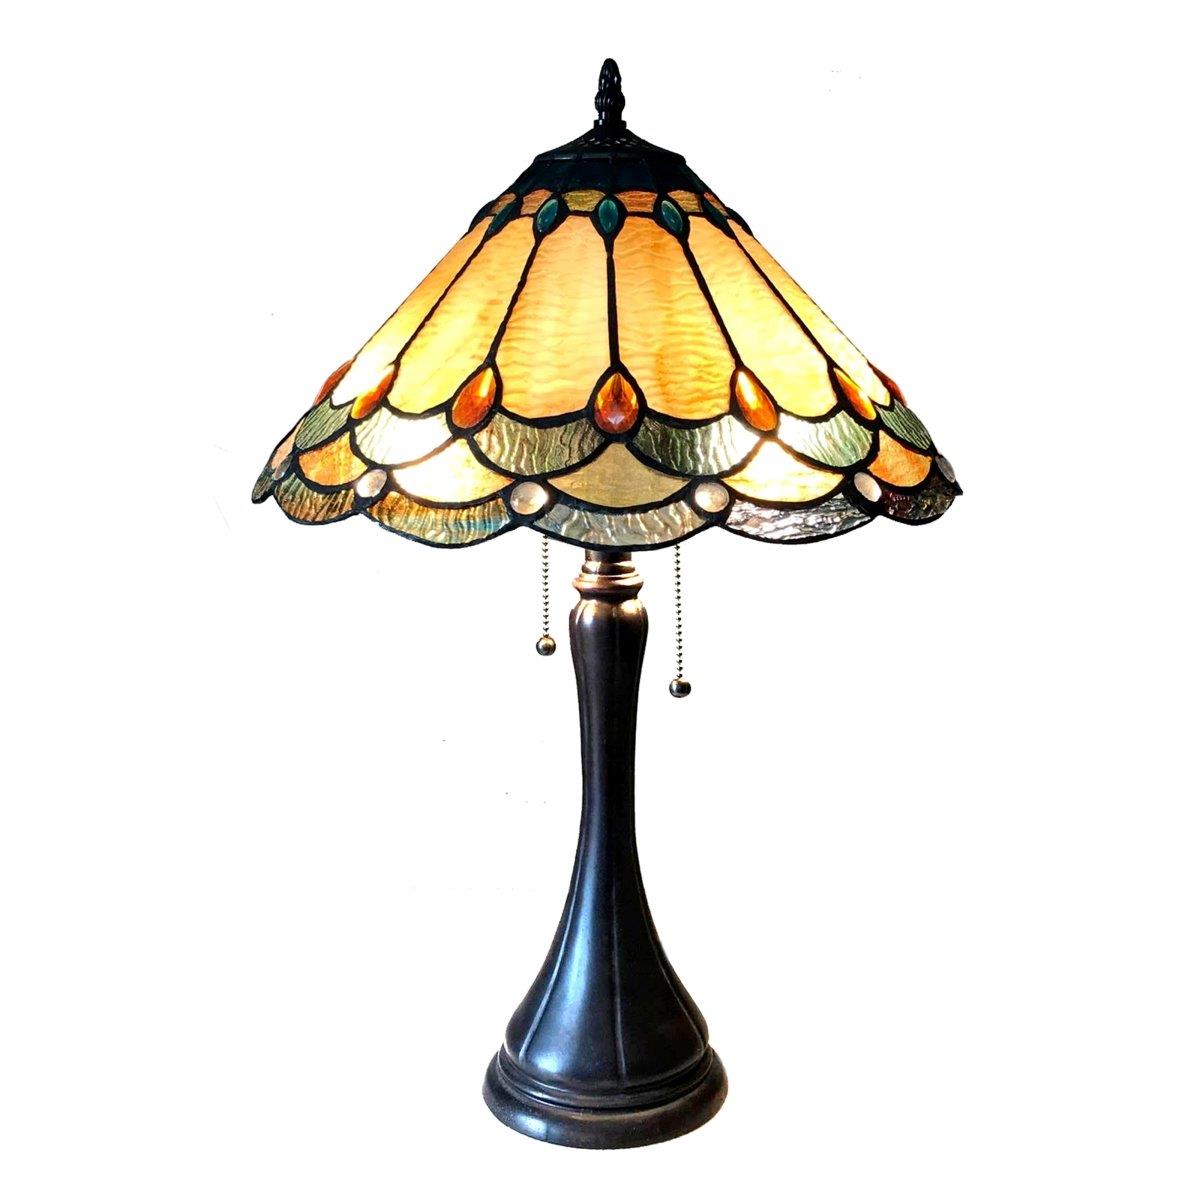 Ch1t141ag15-tl2 Amelia Victorian 2 Light Antique Dark Bronze Table Lamp - 15 In. Shade